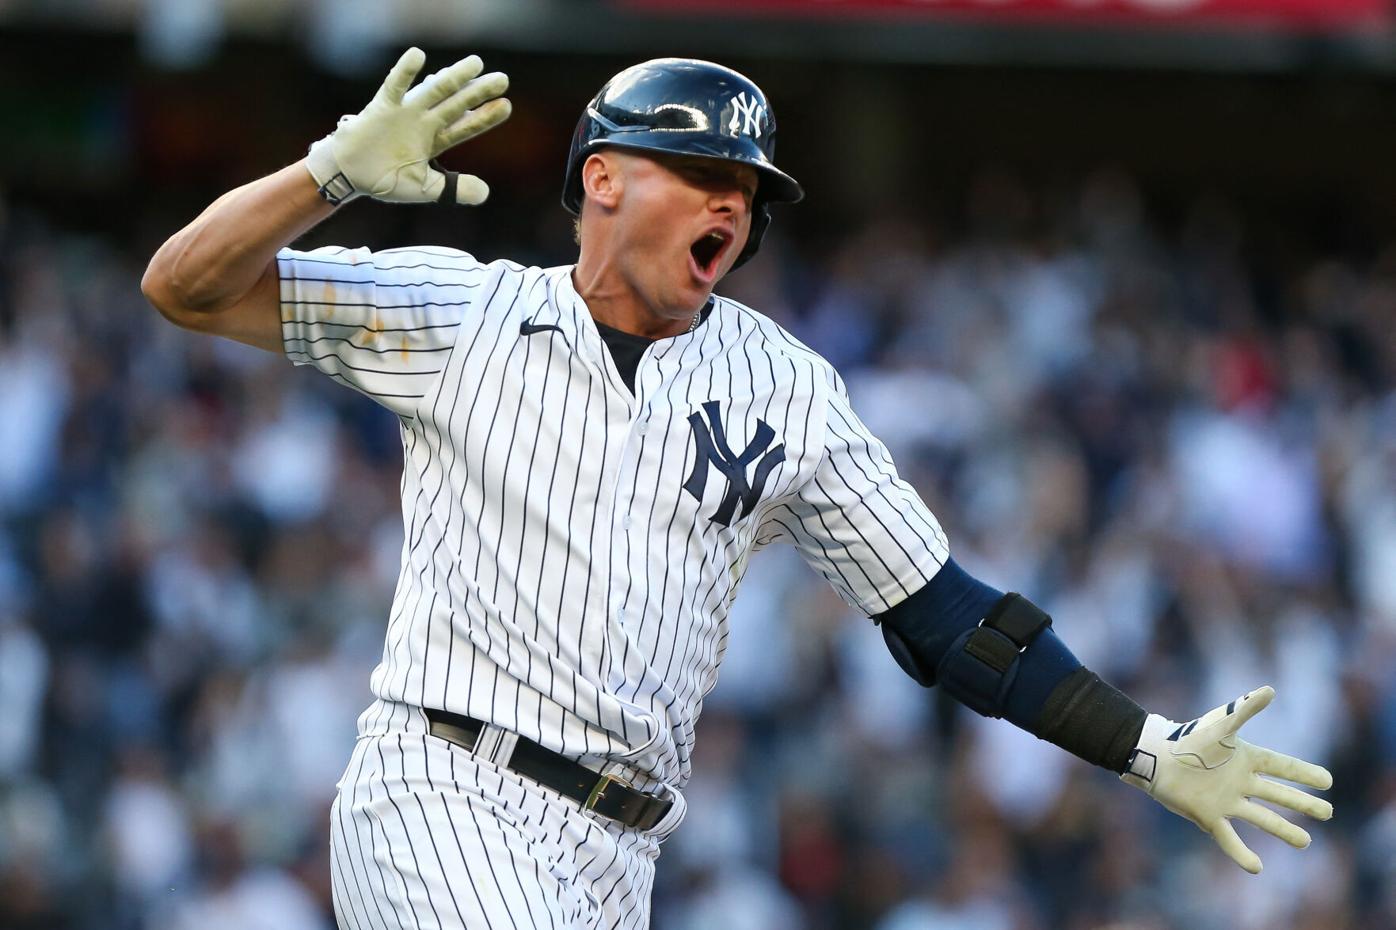 Donaldson lifts Yankees to opening win over Red Sox in 11th